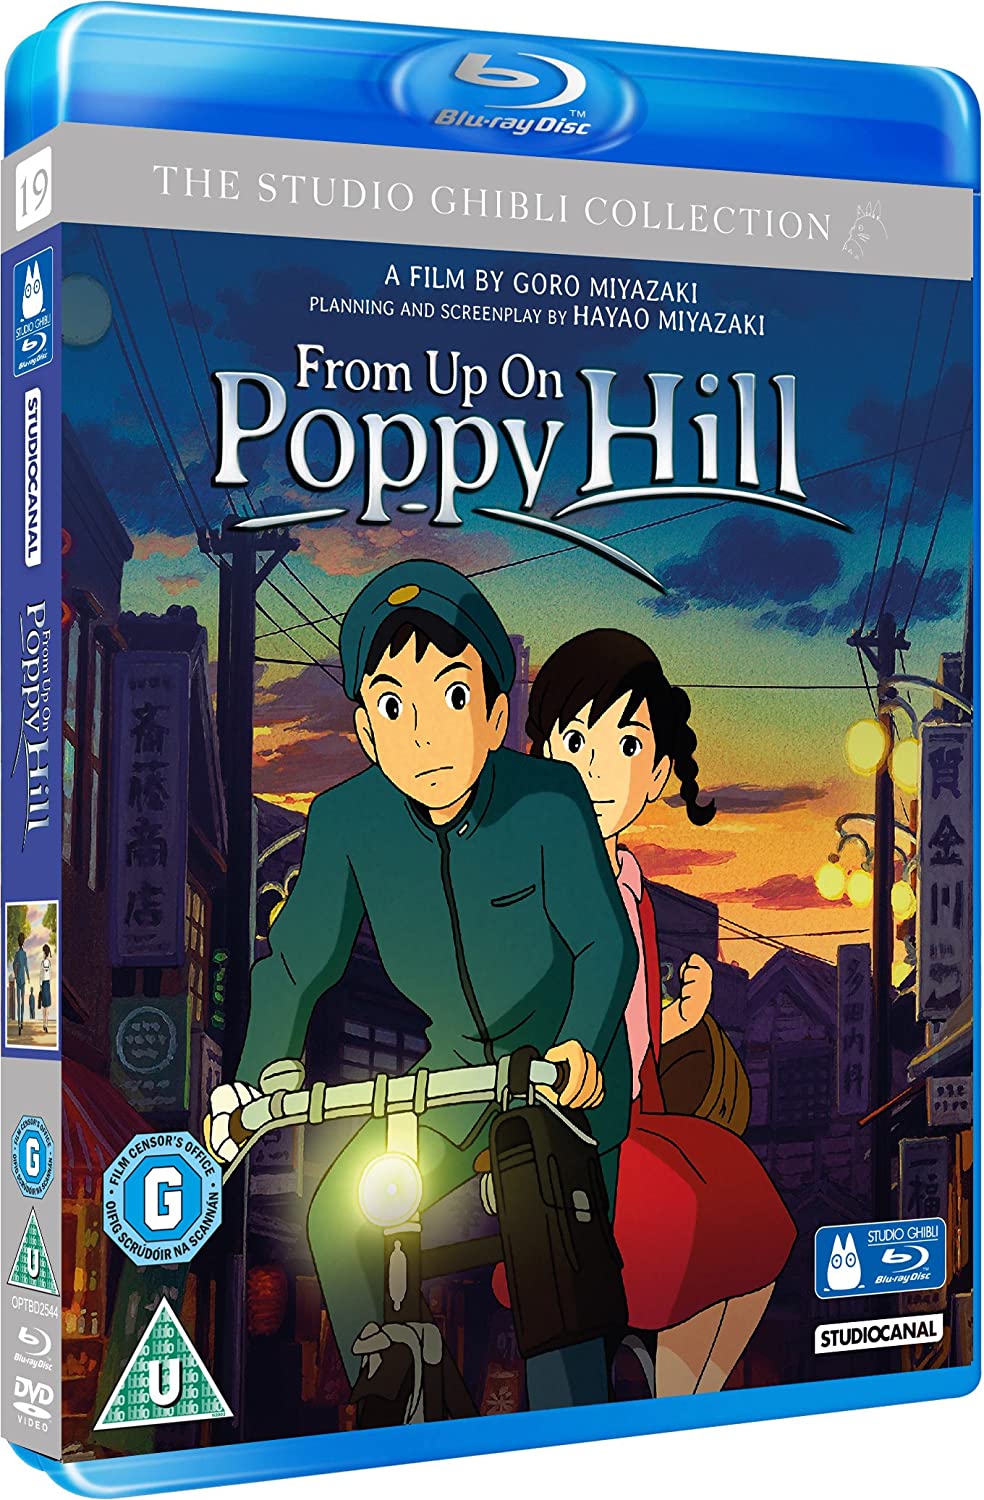 From Up On Poppy Hill - Family/Romance [Blu-ray]